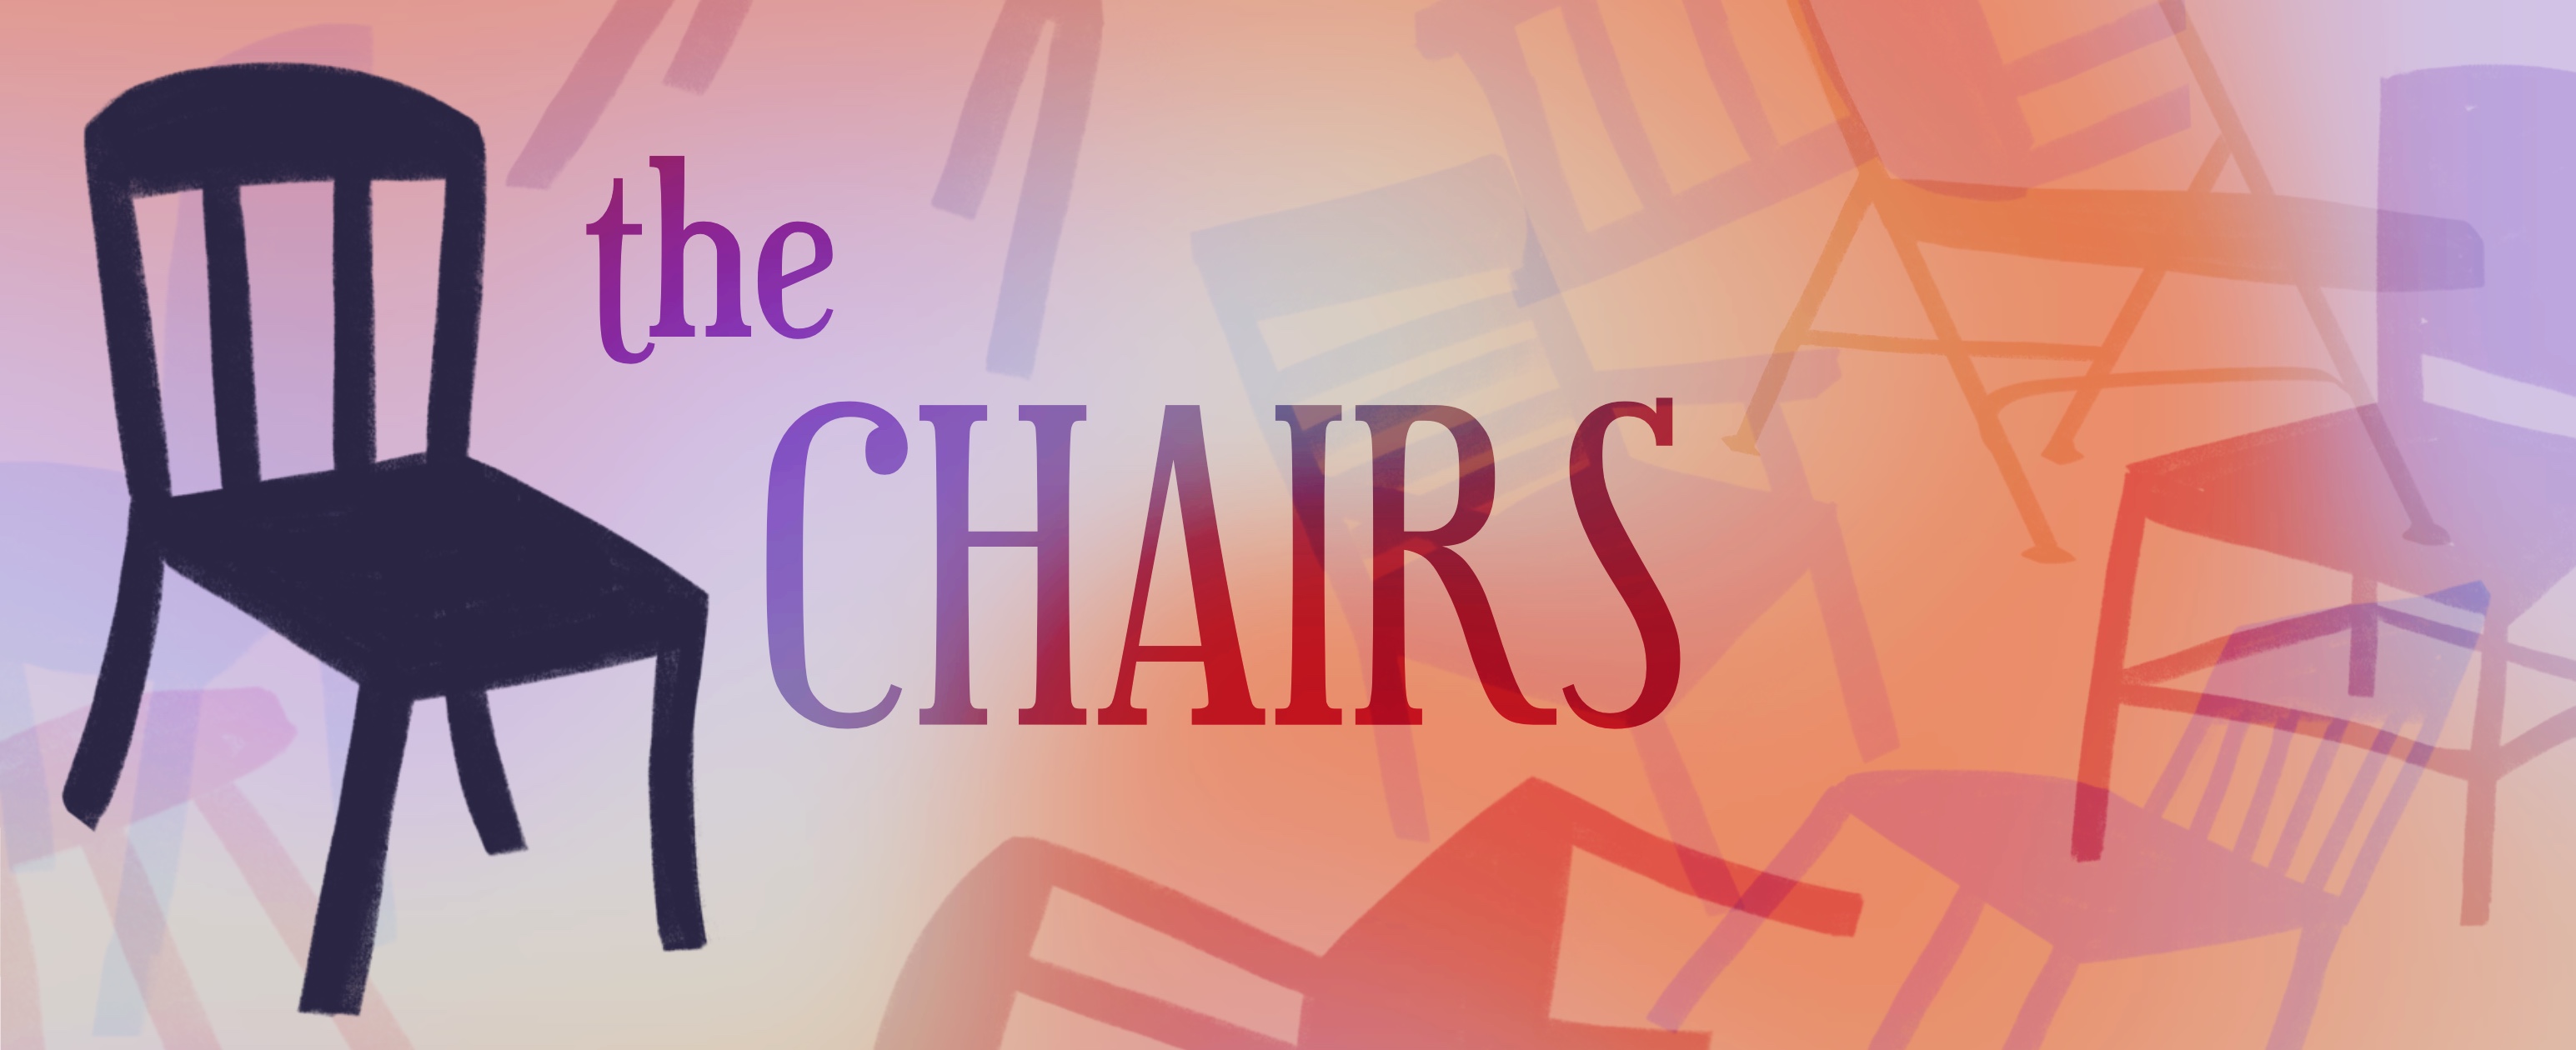 The Chairs artwork